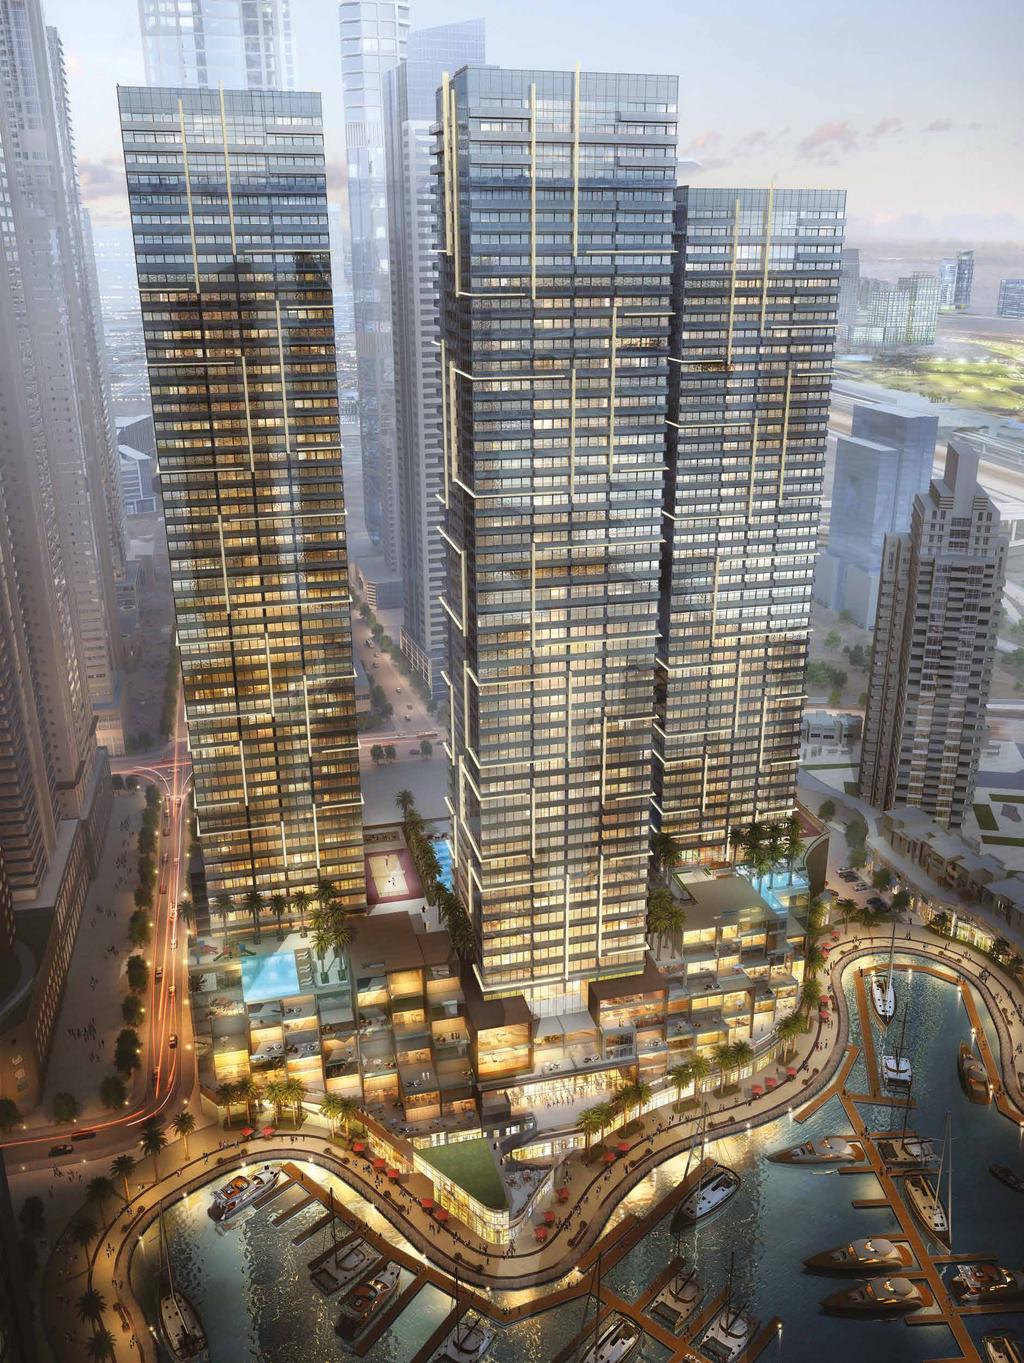 LIFESTYLE LOCATION LUXURY Contents Dynamic Dubai Unrivalled Location Introducing The Residences at Marina Gate Breathtaking Views The Residences The Lifestyle Retail at